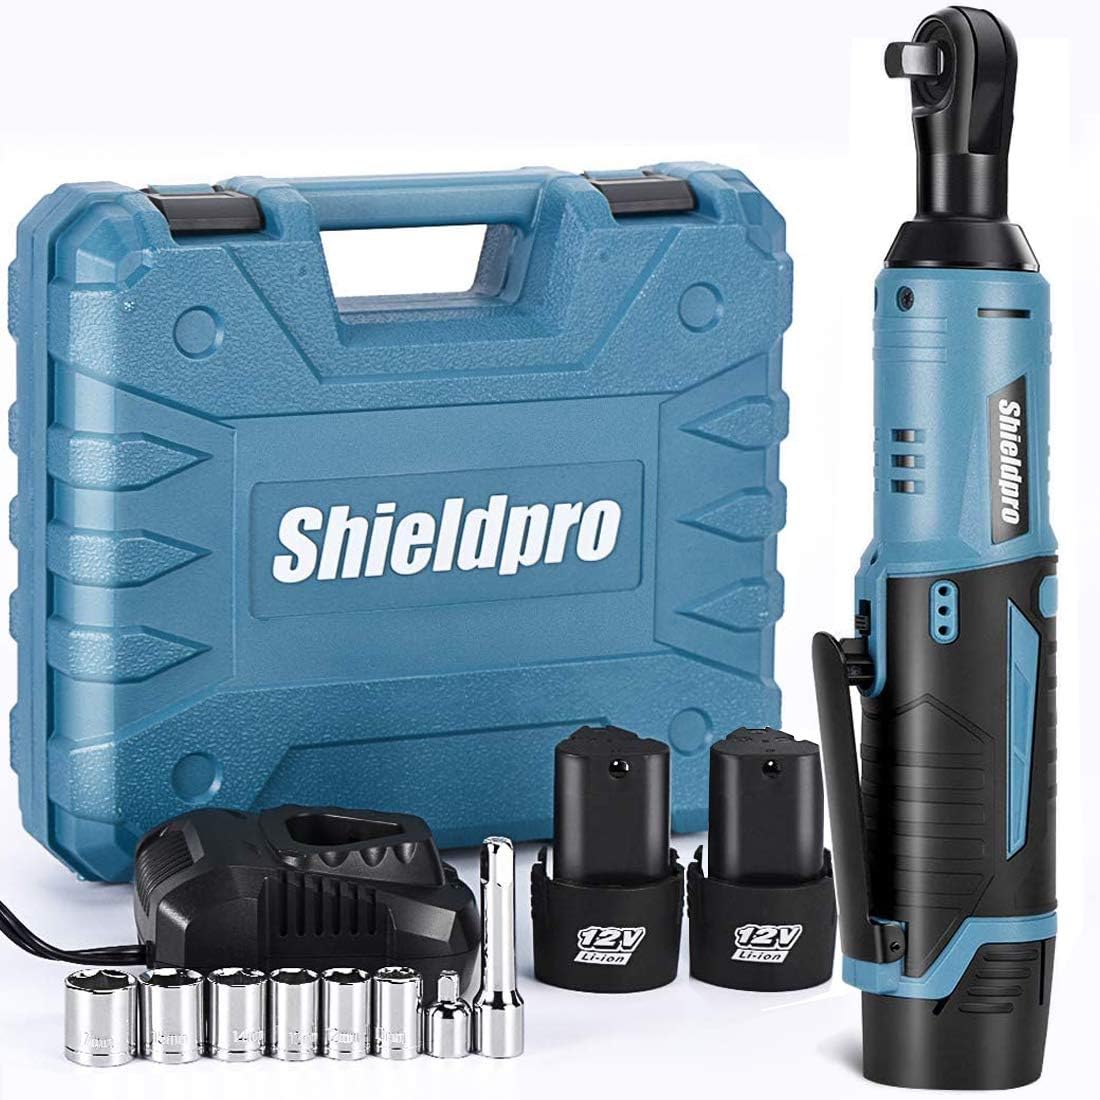 SHIELDPRO Cordless Electric Ratchet Wrench Kit,40Ft-lb [...]